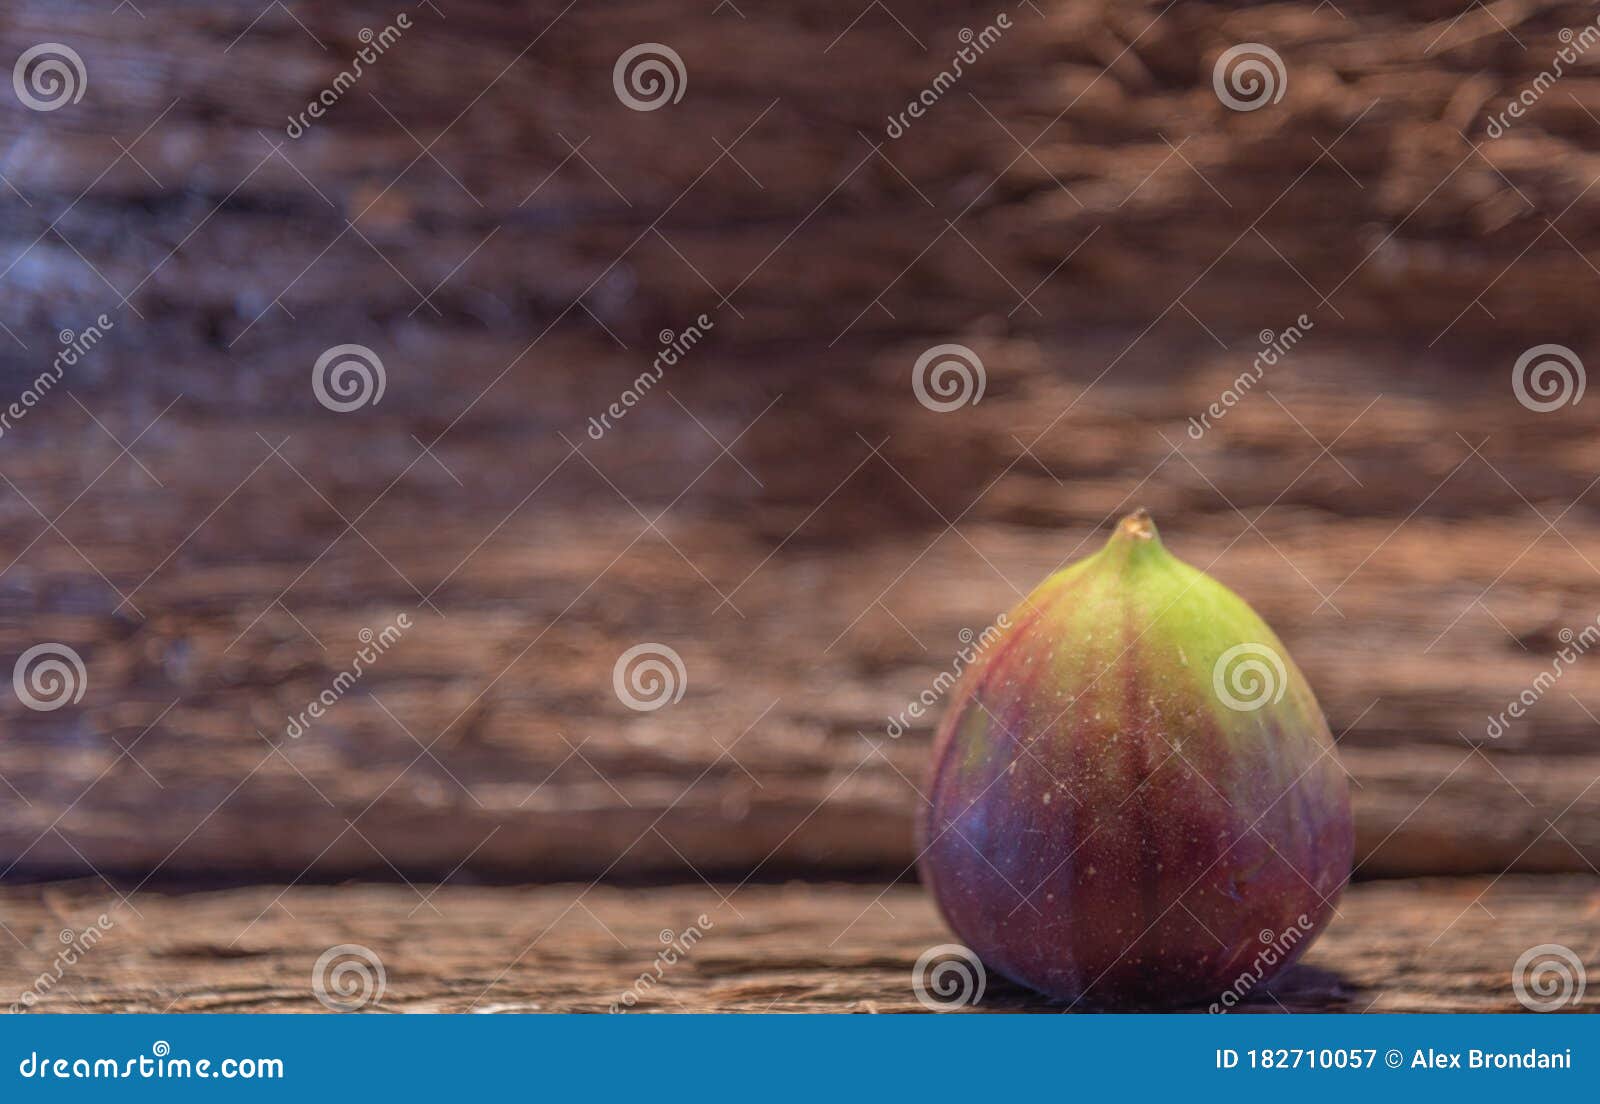 fresh fig fruits on aged wooden background